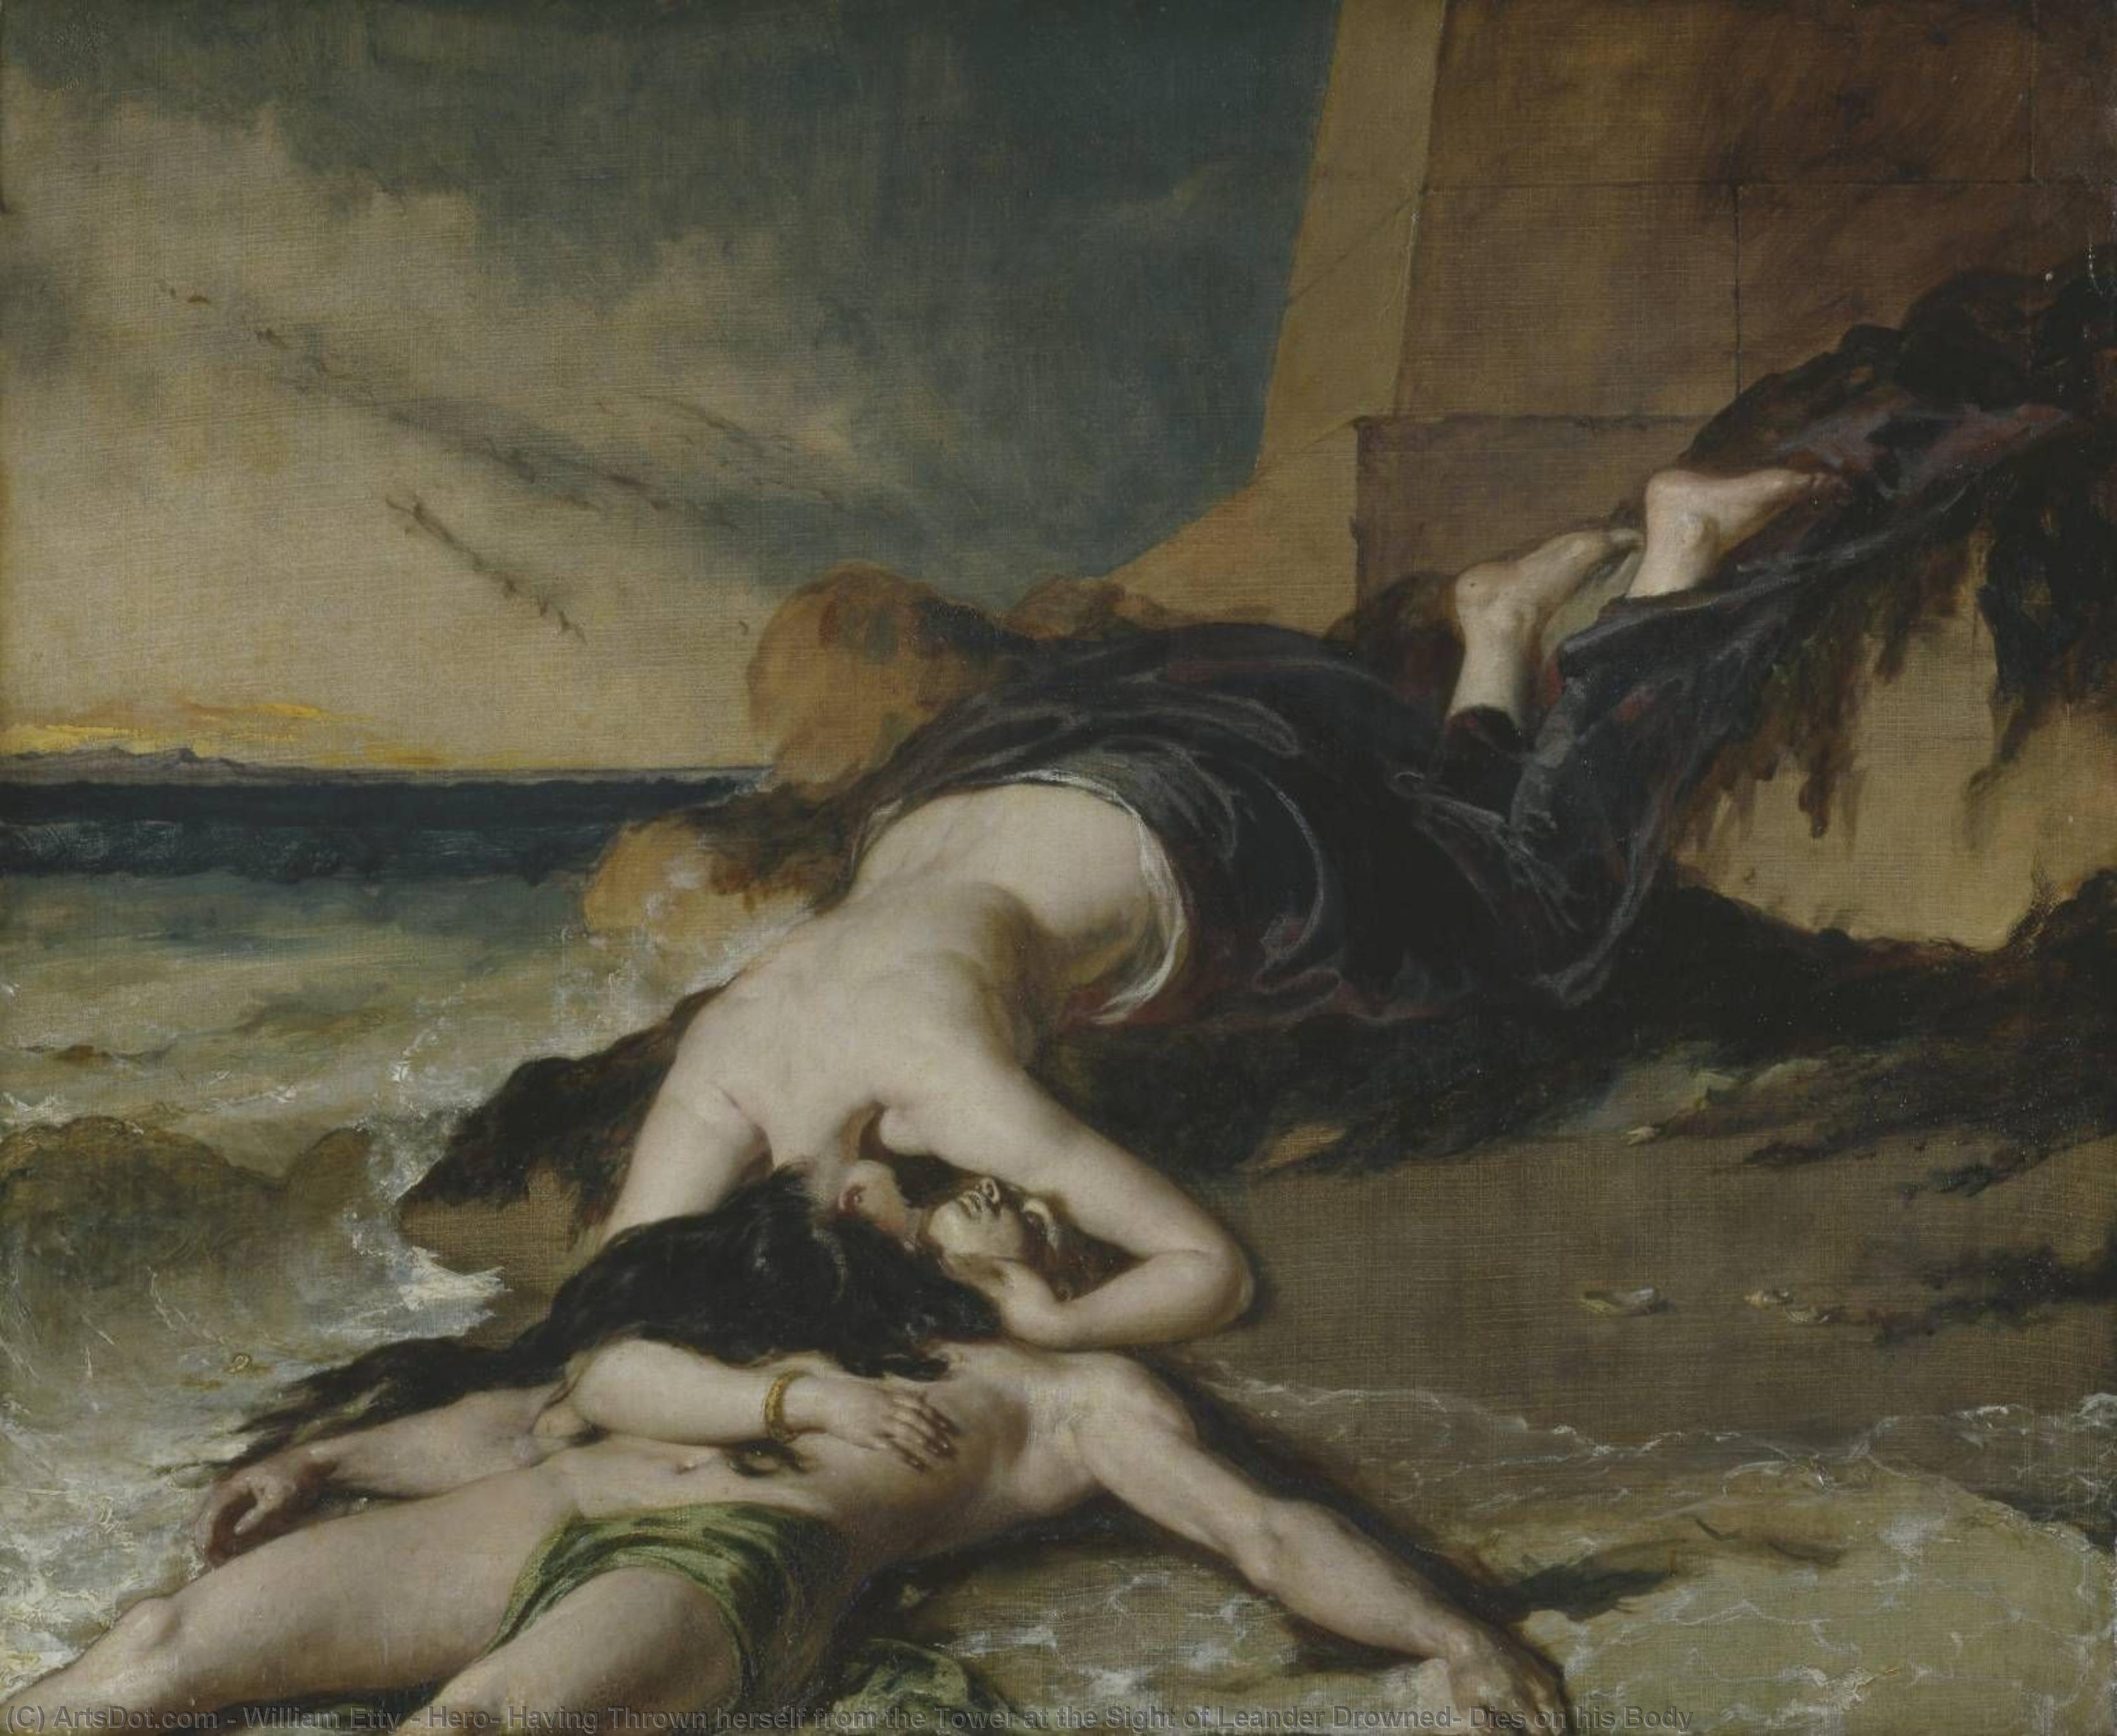 Buy Museum Art Reproductions Hero, Having Thrown herself from the Tower at the Sight of Leander Drowned, Dies on his Body, 1829 by William Etty (1787-1849, United Kingdom) | ArtsDot.com